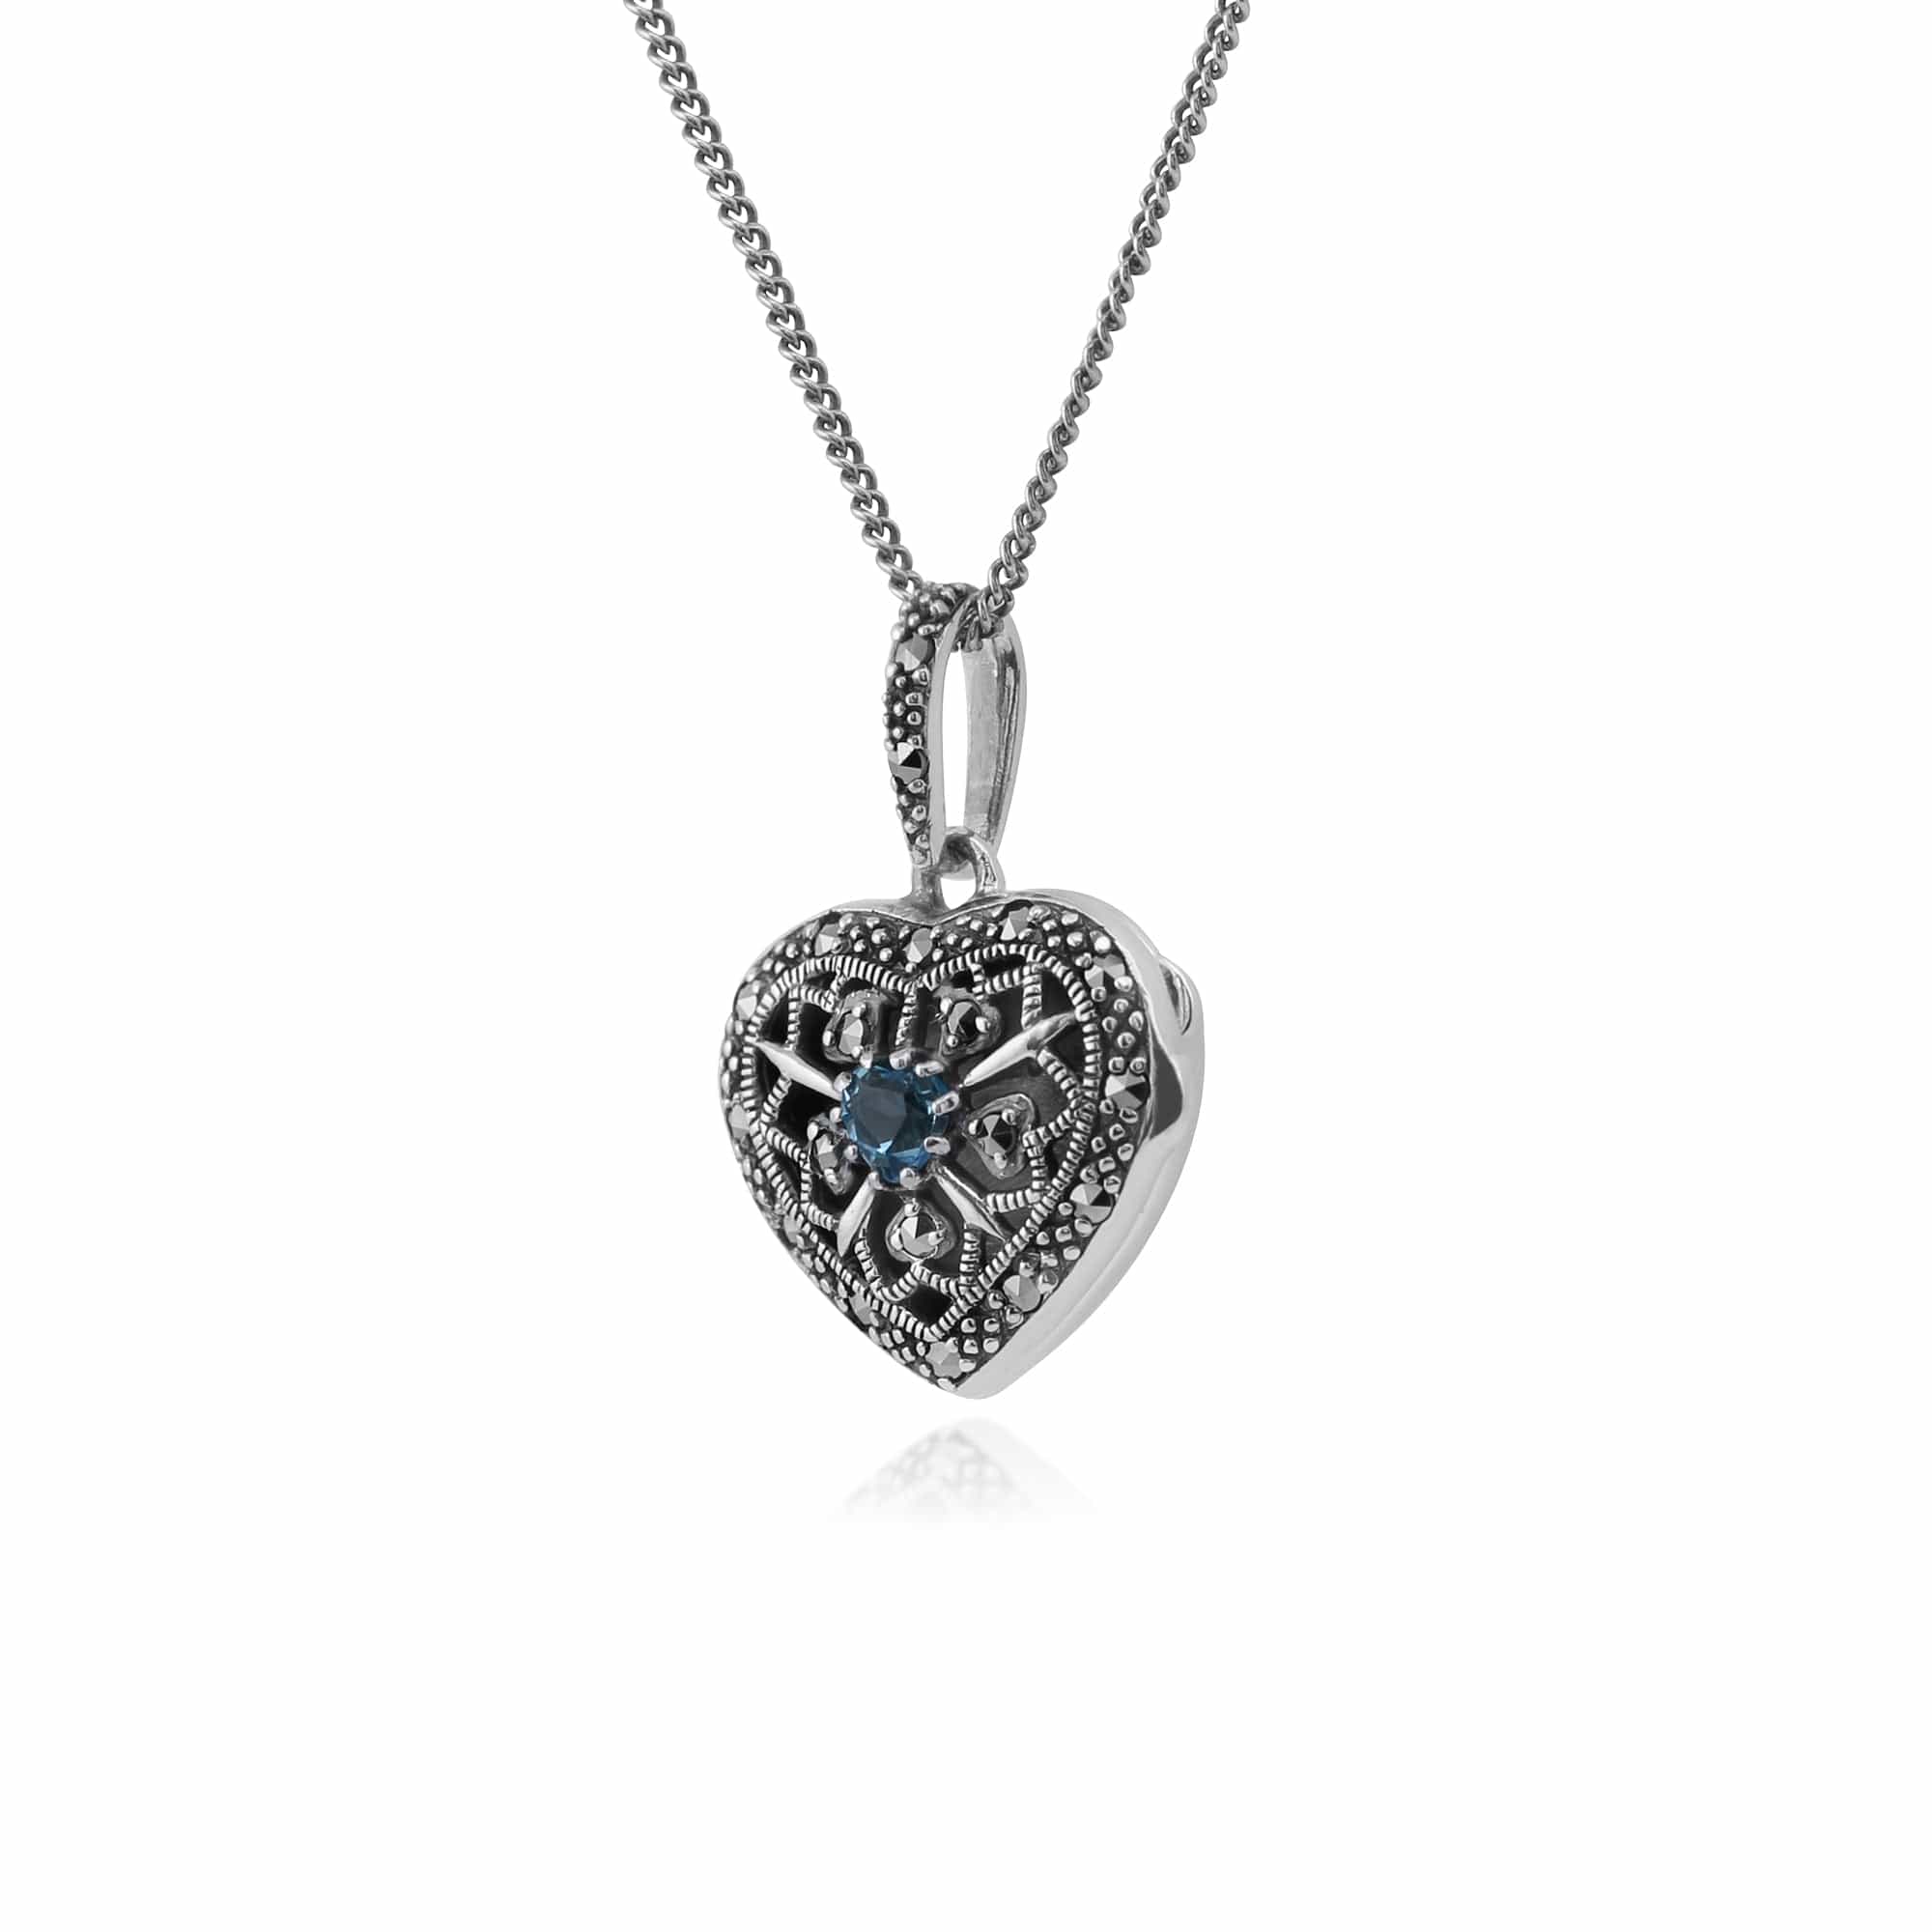 214N461908925 Art Nouveau Style Round Blue Topaz & Marcasite Heart Necklace in 925 Sterling Silver 2